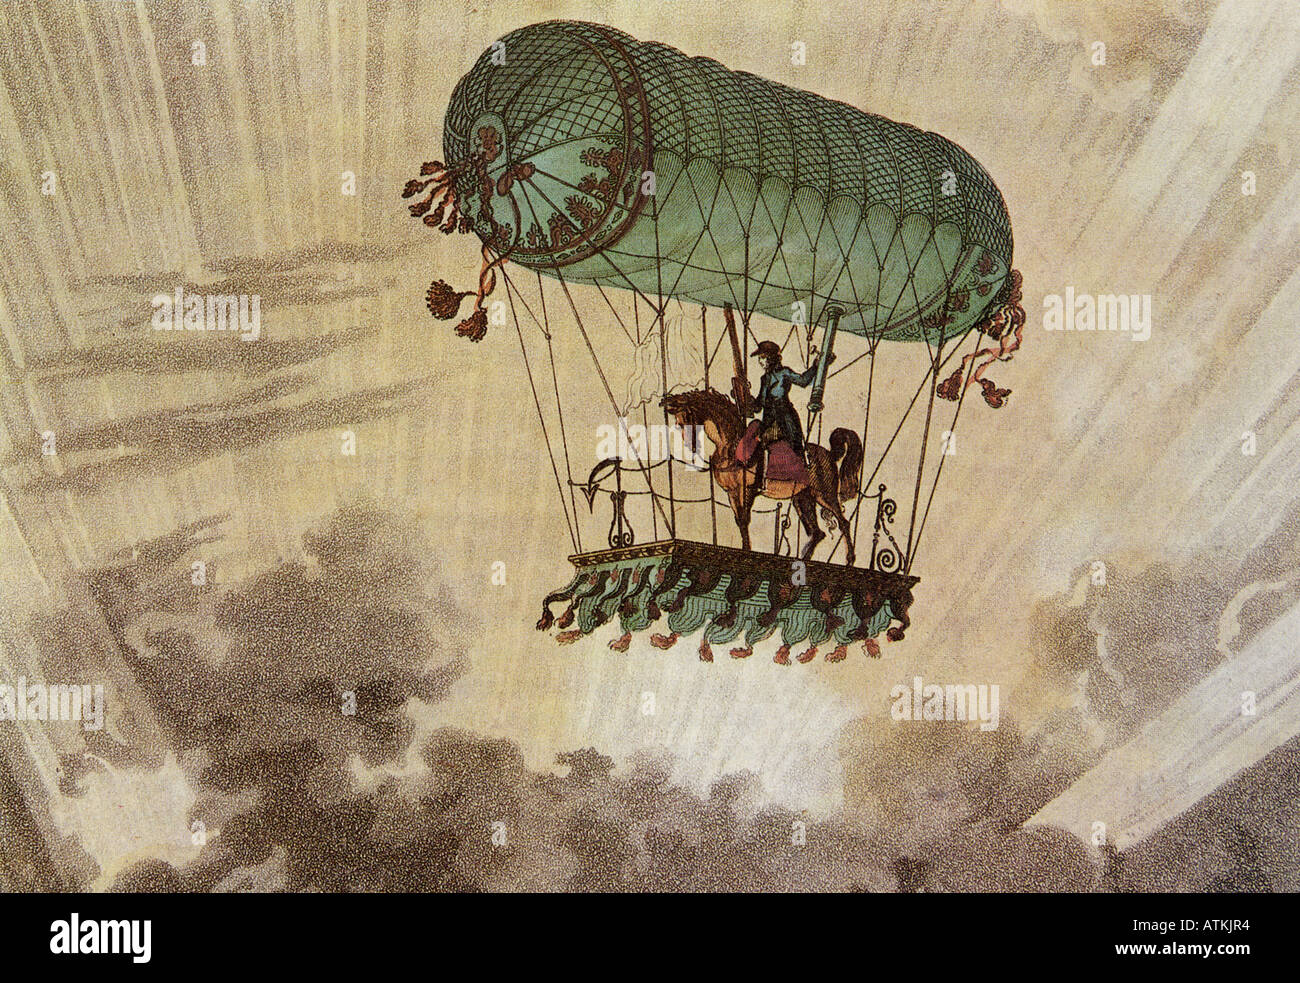 HOT AIR BALLOON ascent with horse 1798 - see Description below for details Stock Photo